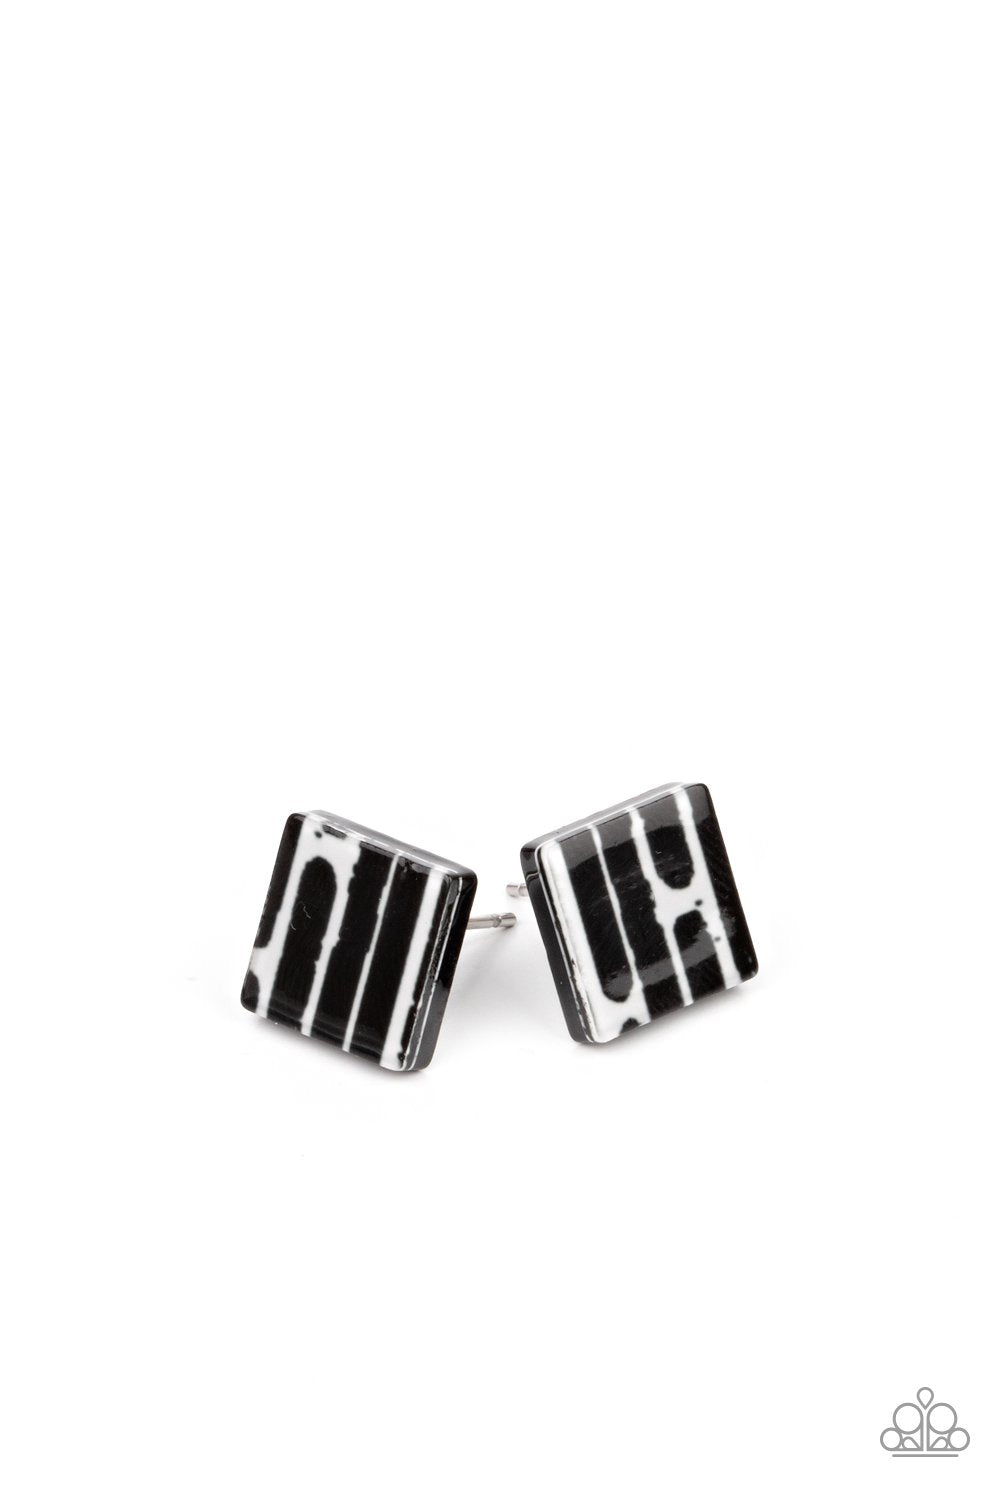 Starlet Shimmer Children&#39;s Black and White Post Earrings - Paparazzi Accessories (set of 5 pairs)- lightbox - CarasShop.com - $5 Jewelry by Cara Jewels